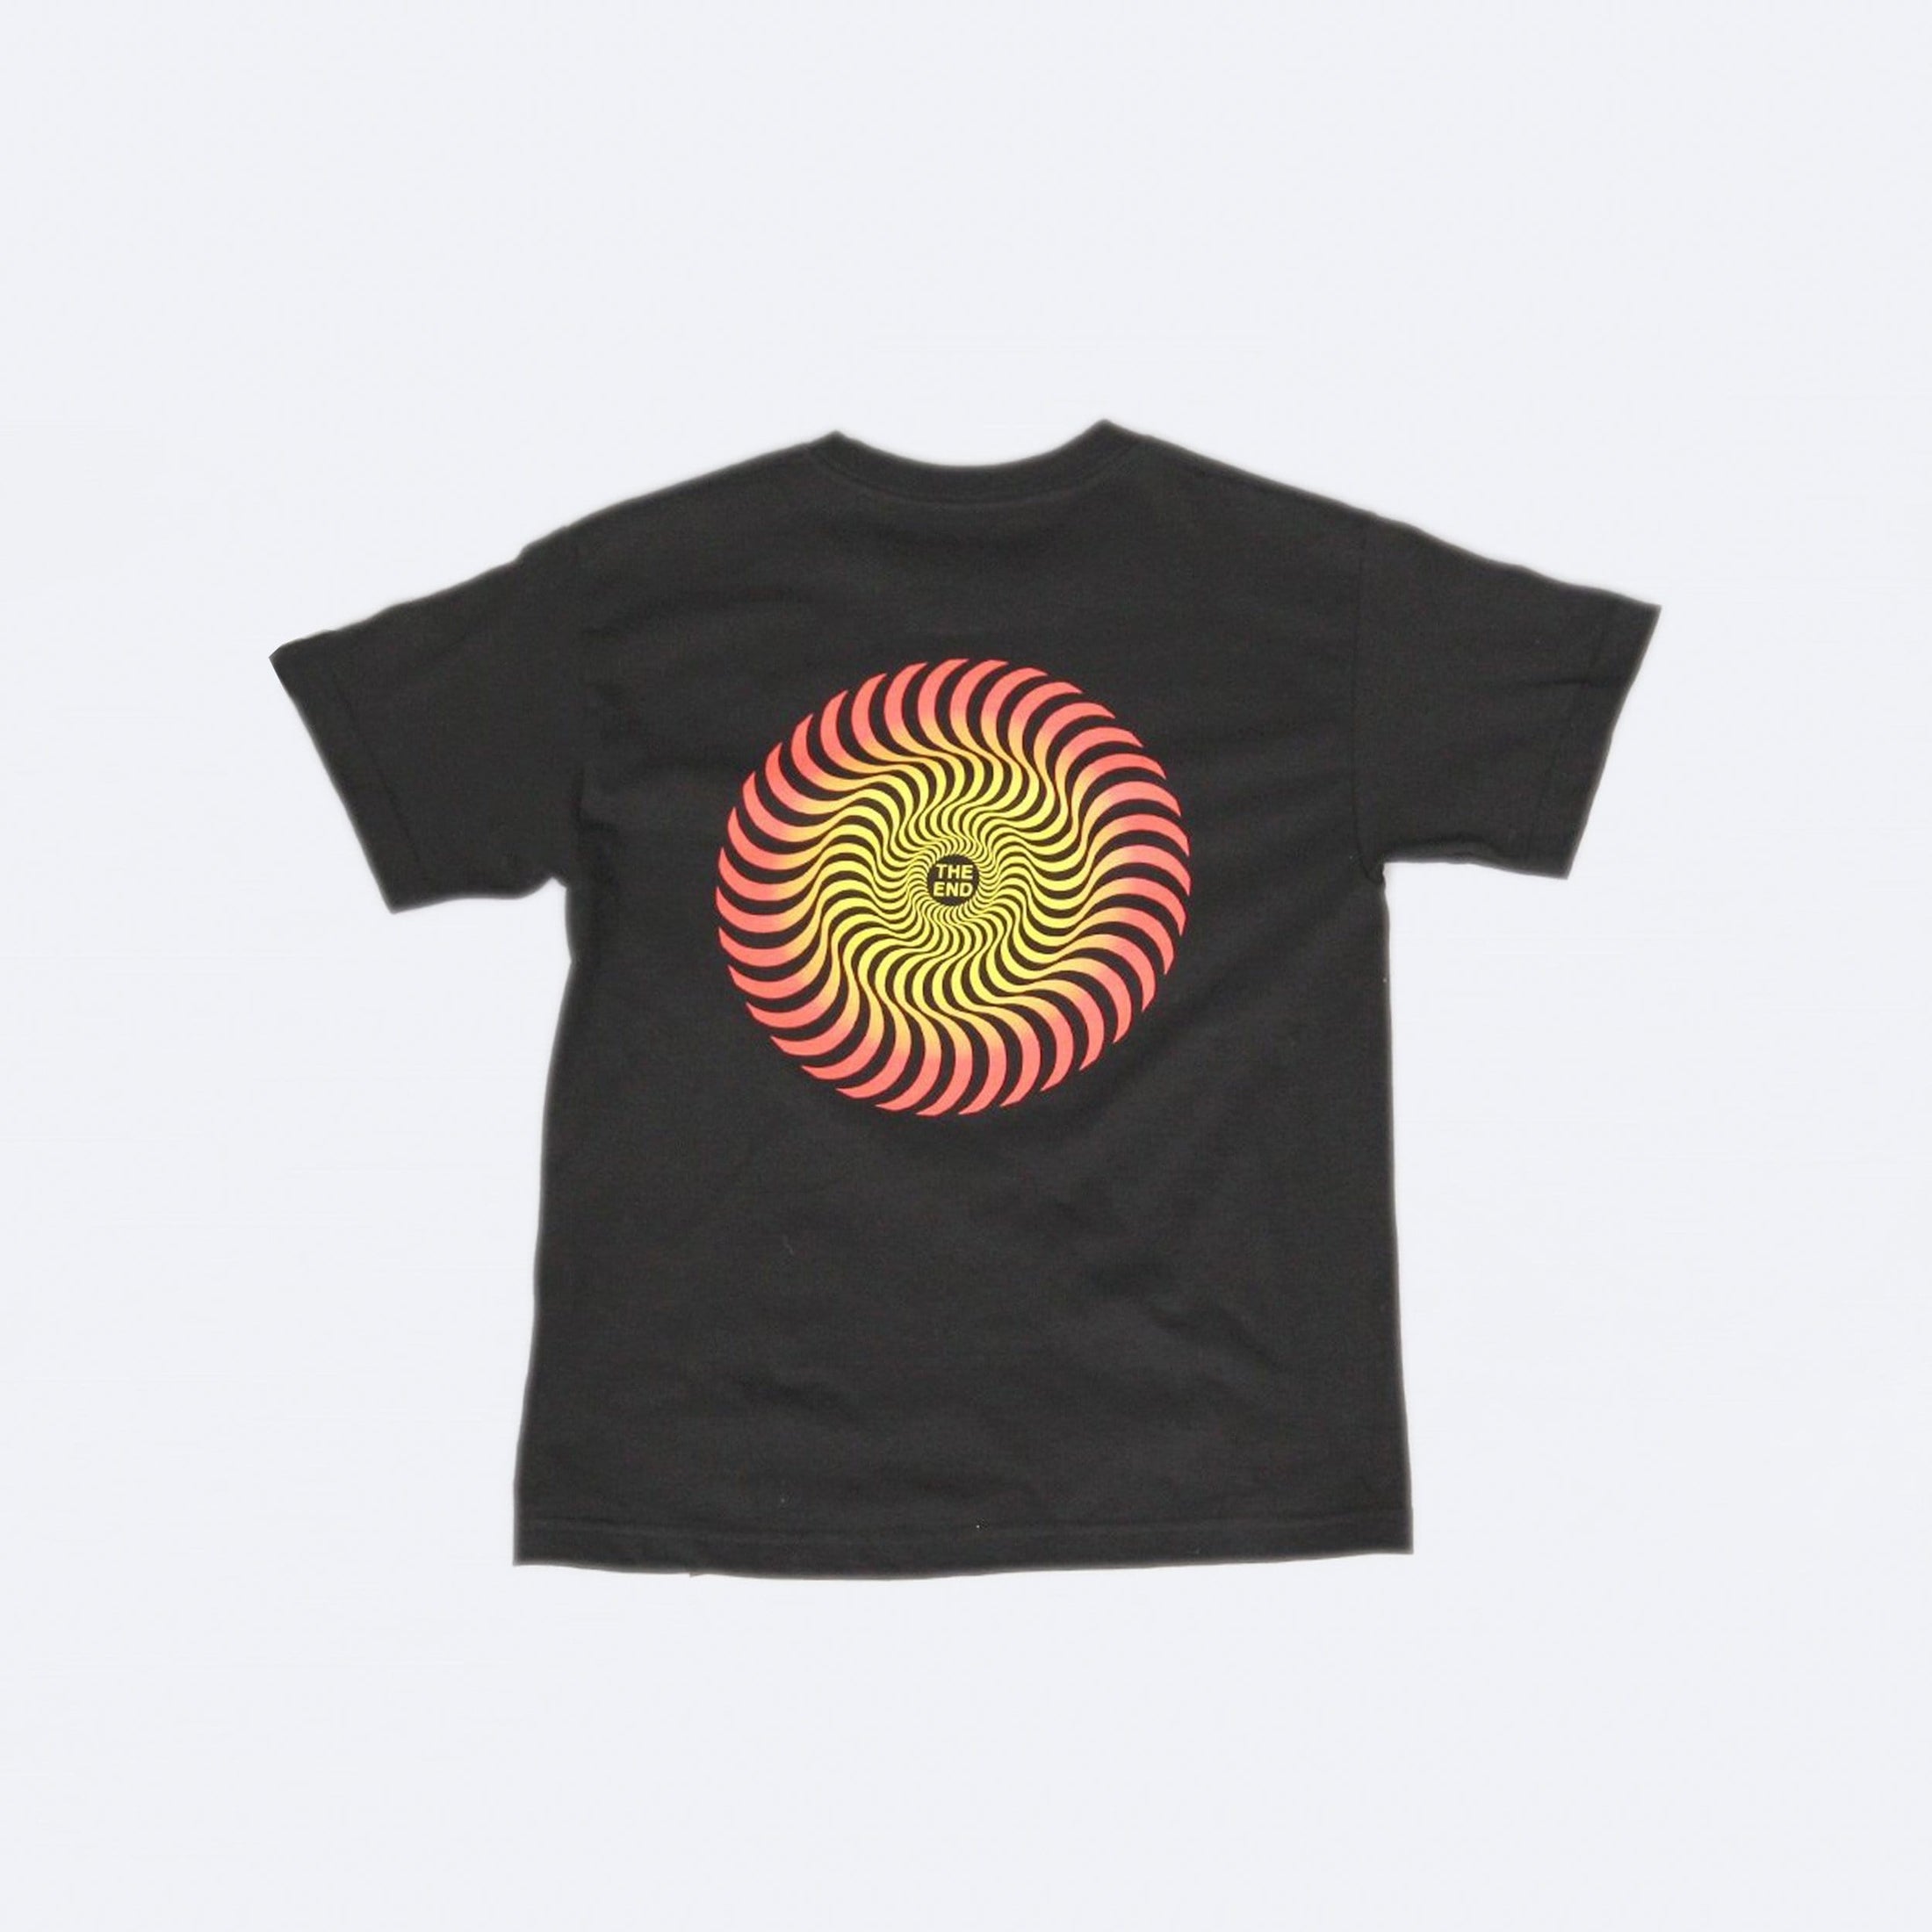 Spitfire Classic Swirl Youth T-Shirt Fade Black / Red / Yellow